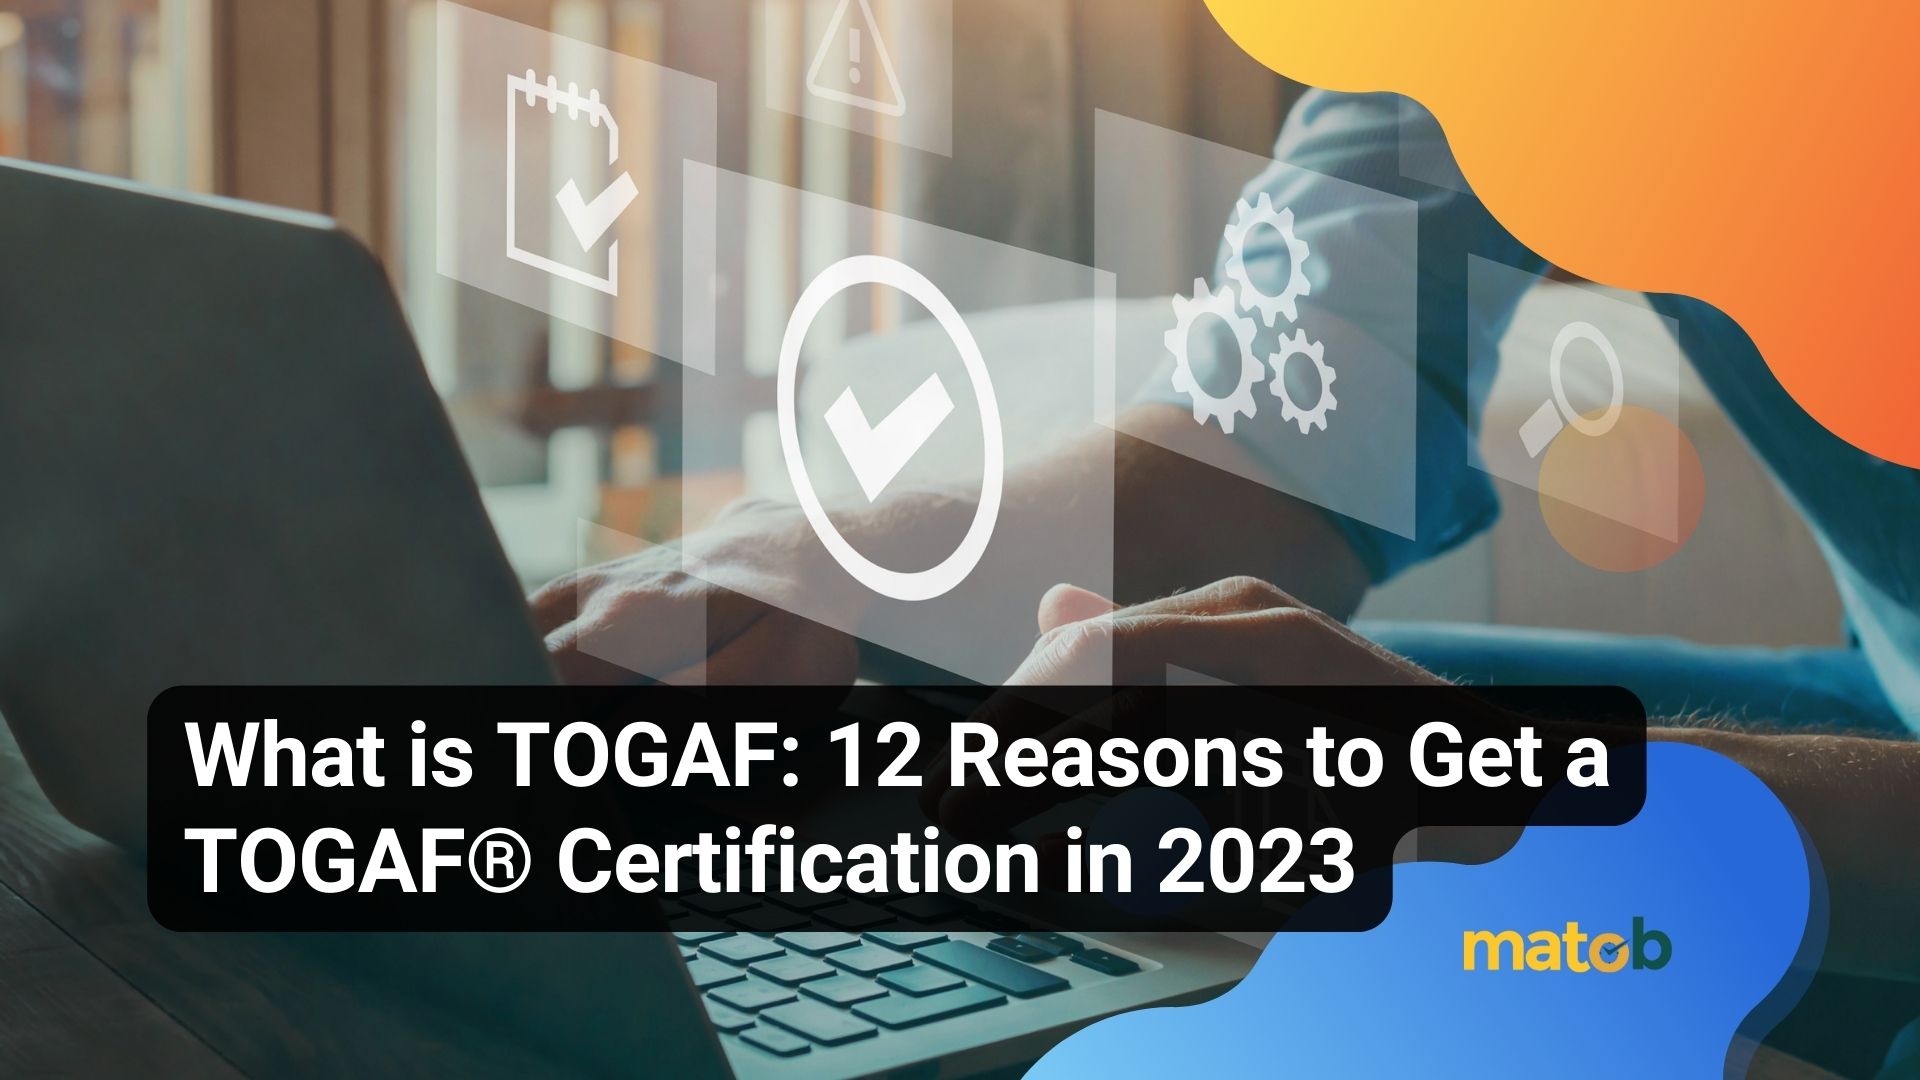 What is TOGAF: 12 Reasons to Get a TOGAF® Certification in 2023